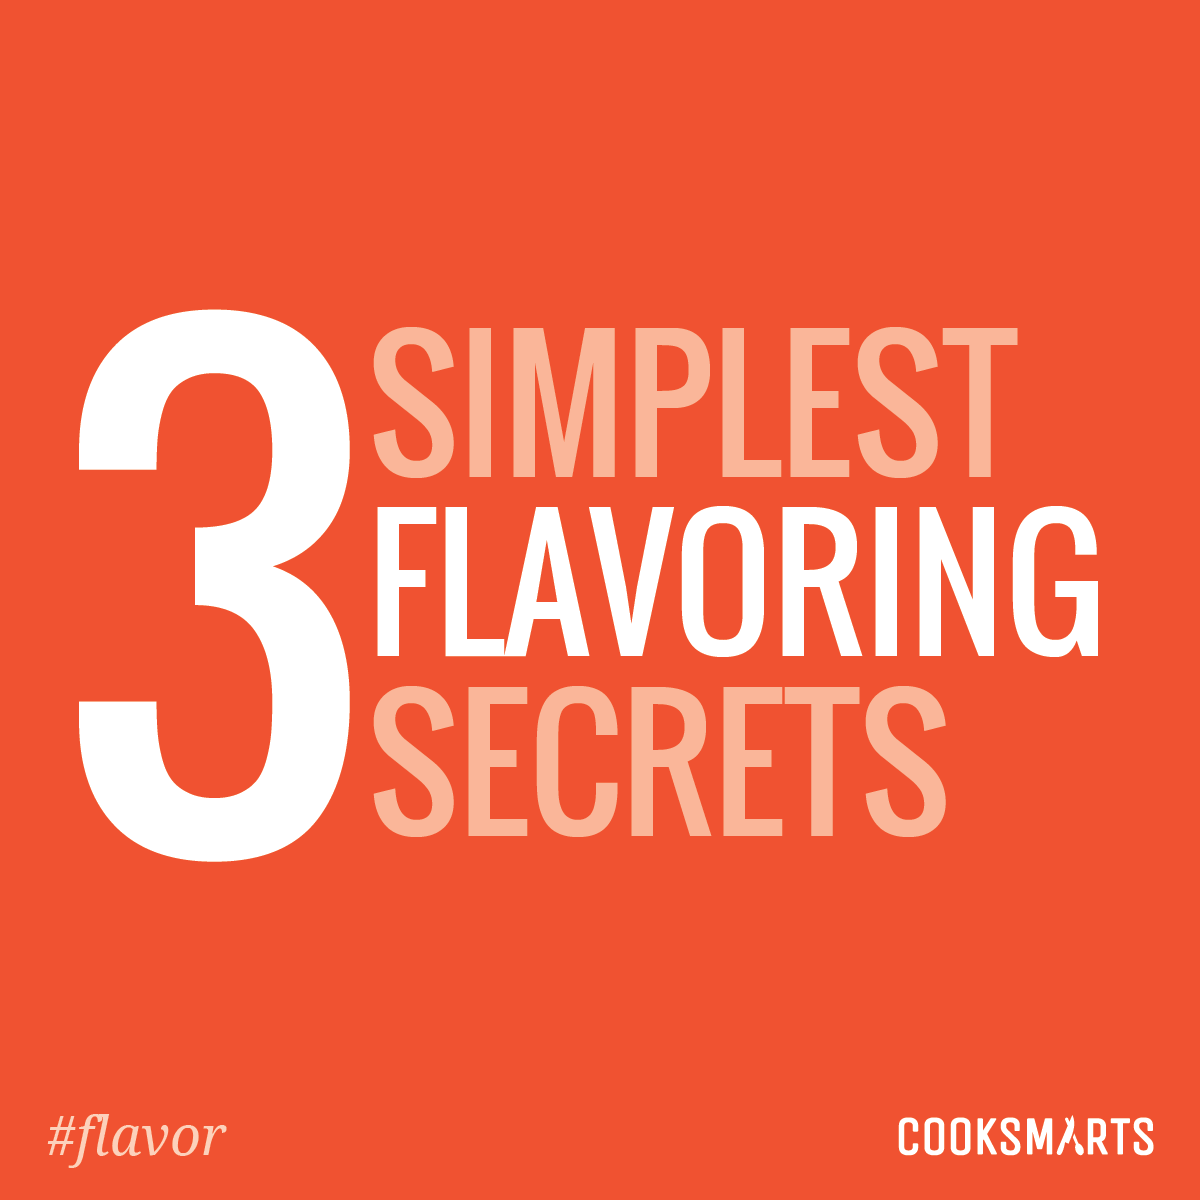 Our 3 Simplest Flavoring Secrets by Cook Smarts @cooksmarts